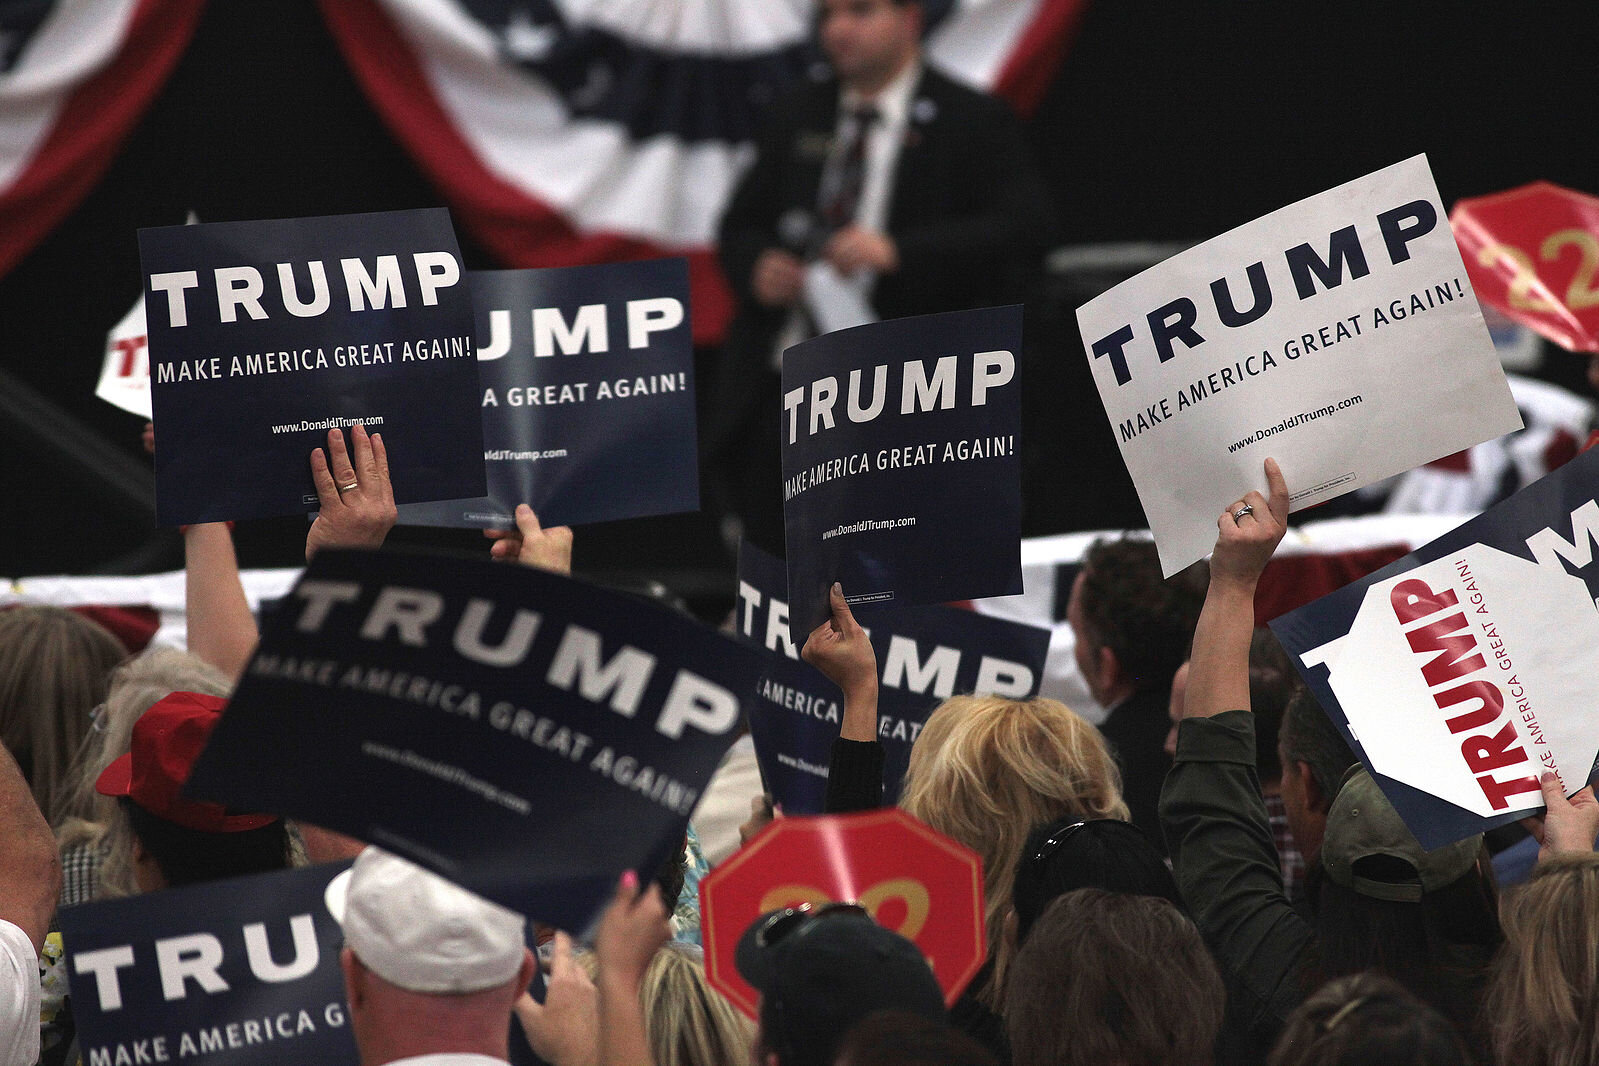 February 22, 2016 - Supporters of Donald Trump at a campaign rally at the South Point Arena in Las Vegas, Nevada. (Photo by Gage Skidmore | Wikimedia Commons)